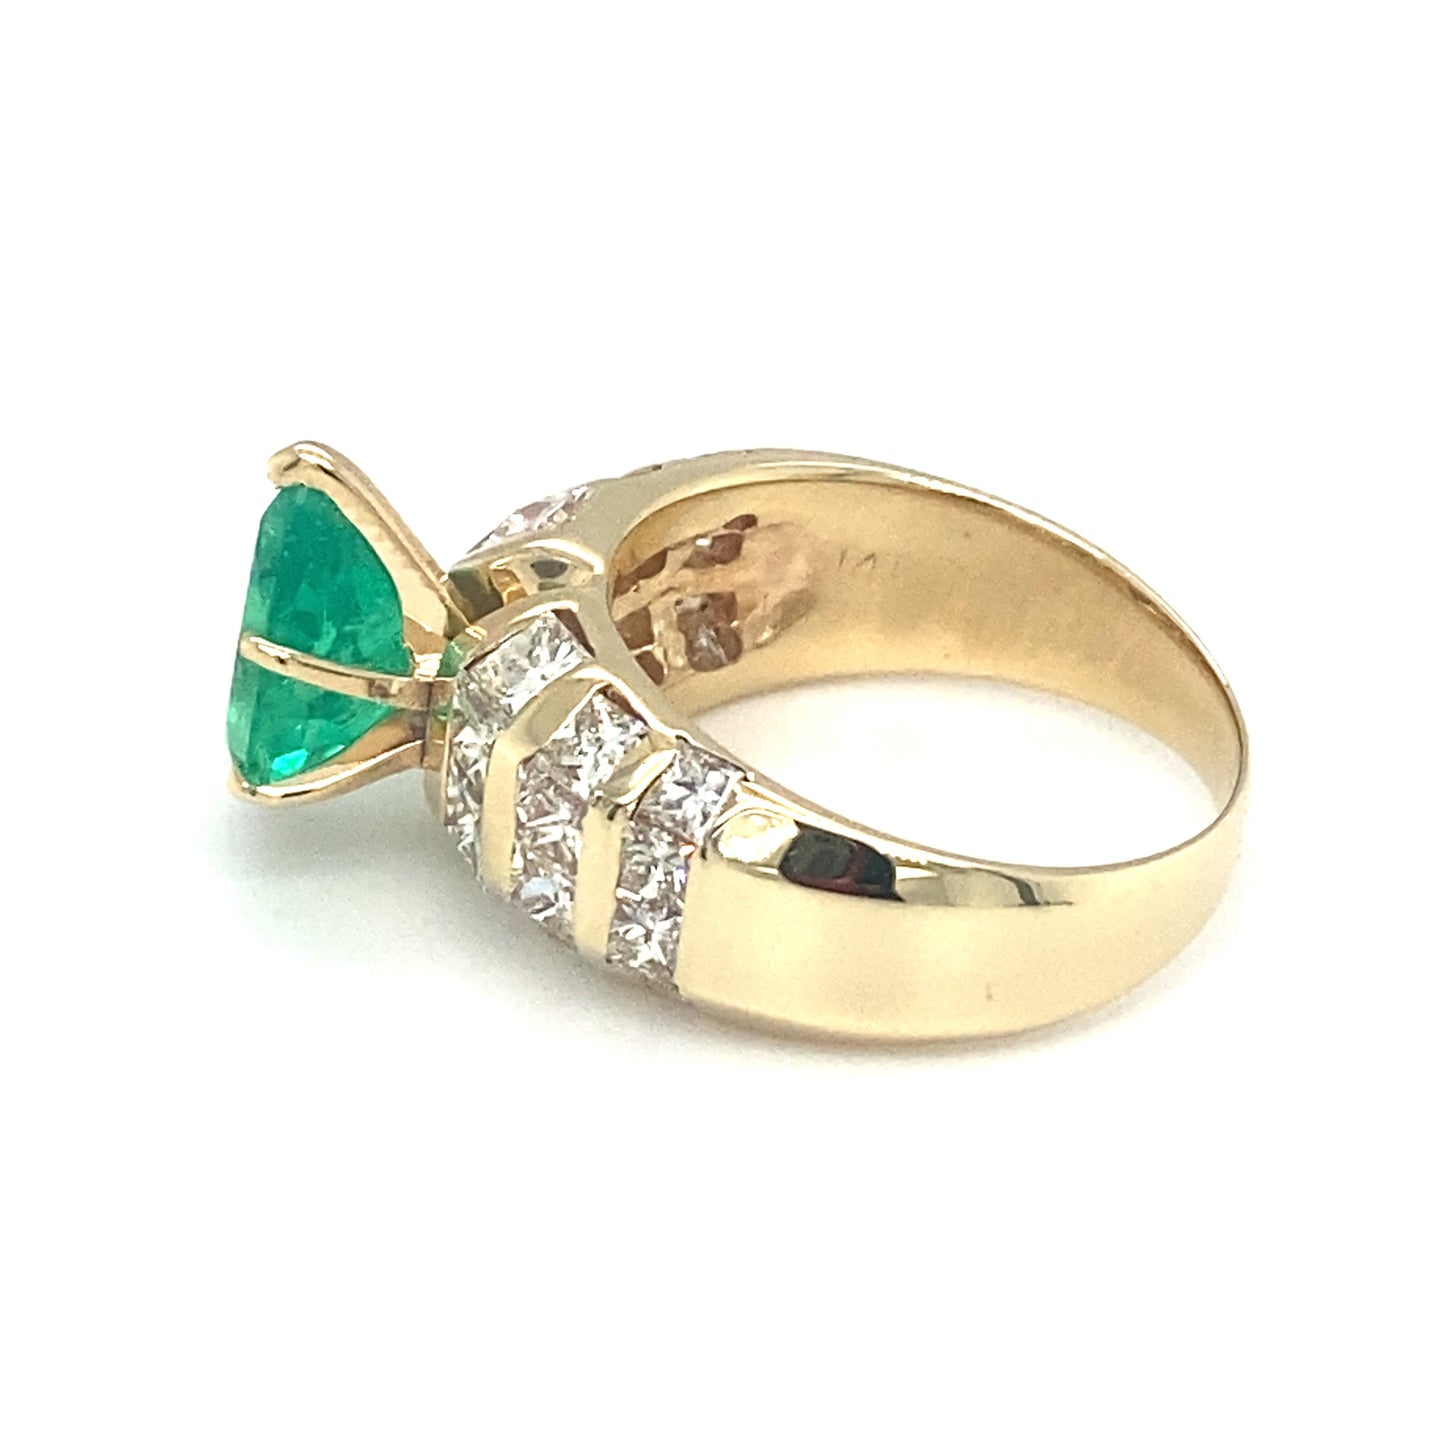 Circa 1990s 1.50ct Pear Cut Emerald and Diamond Ring in 14K Gold